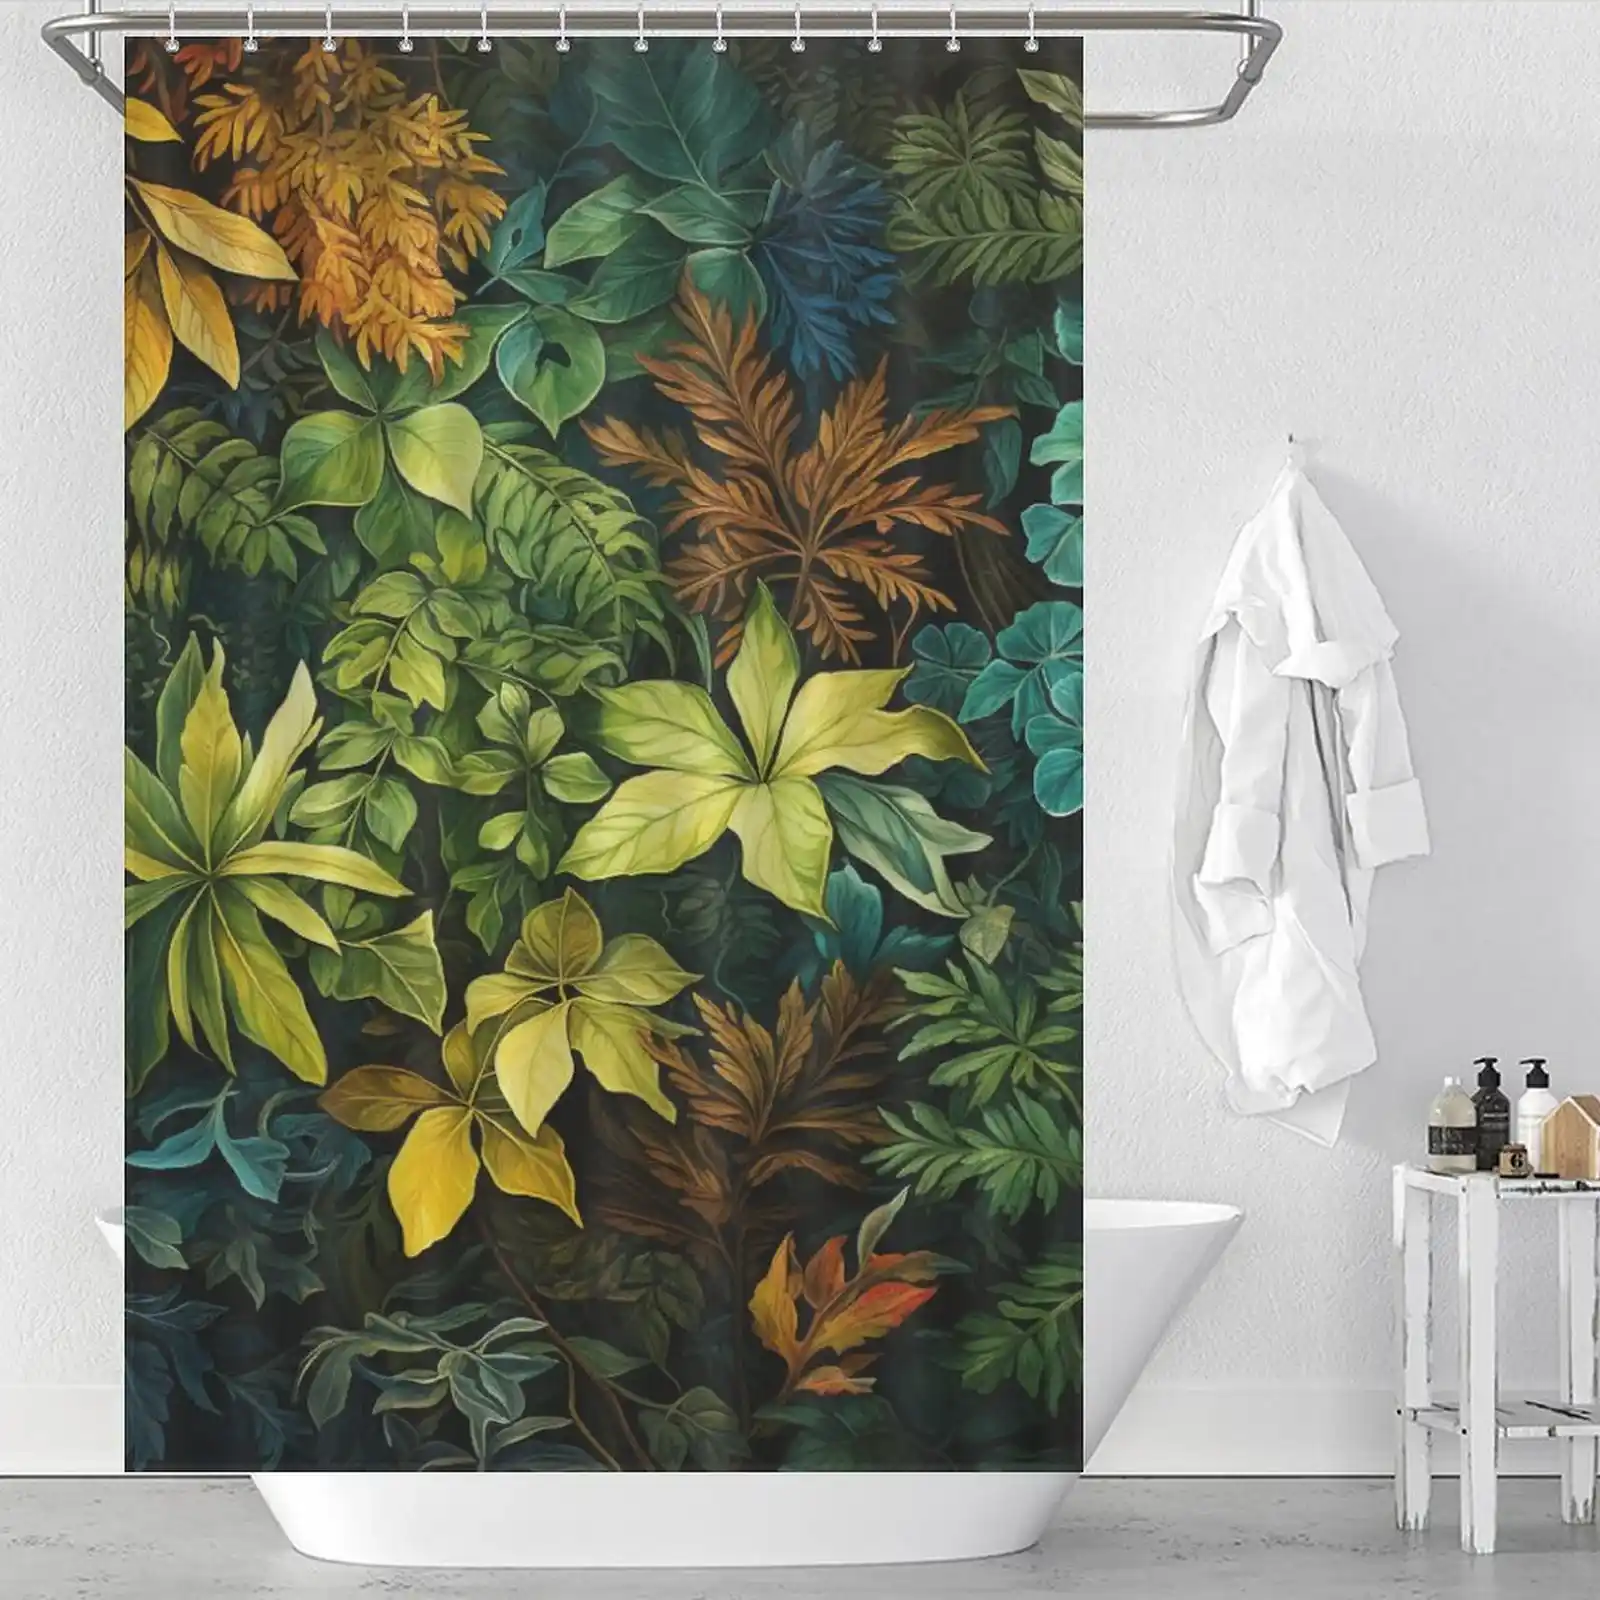 Olive green bathroom decor ideas: A shower curtain with a pattern of leaves.